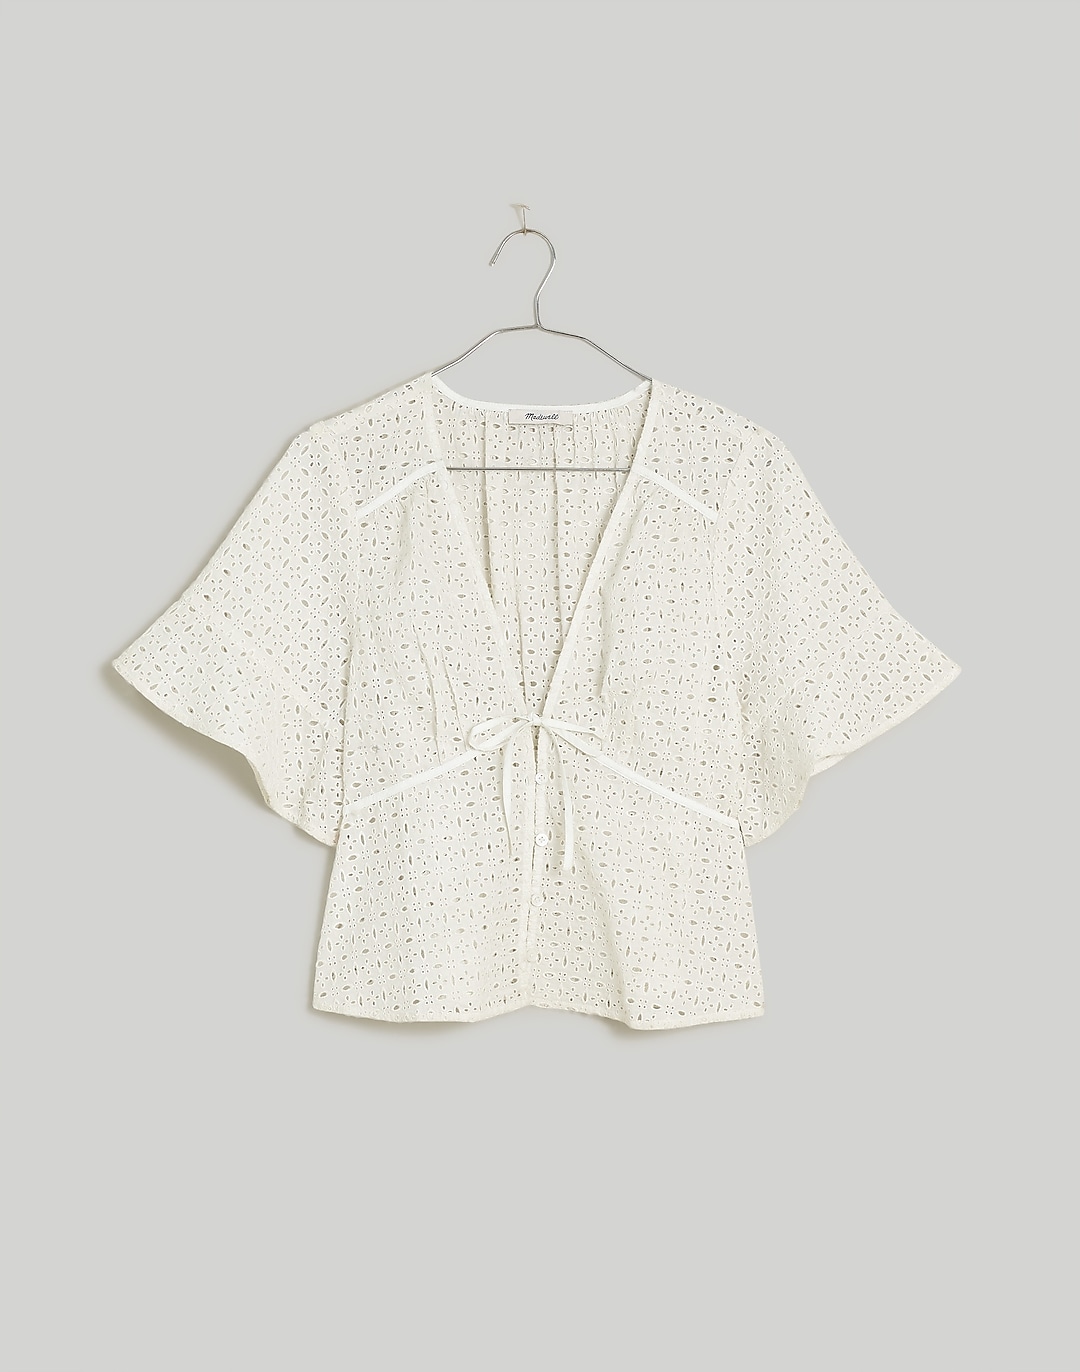 Tie-Front Top in Eyelet | Madewell